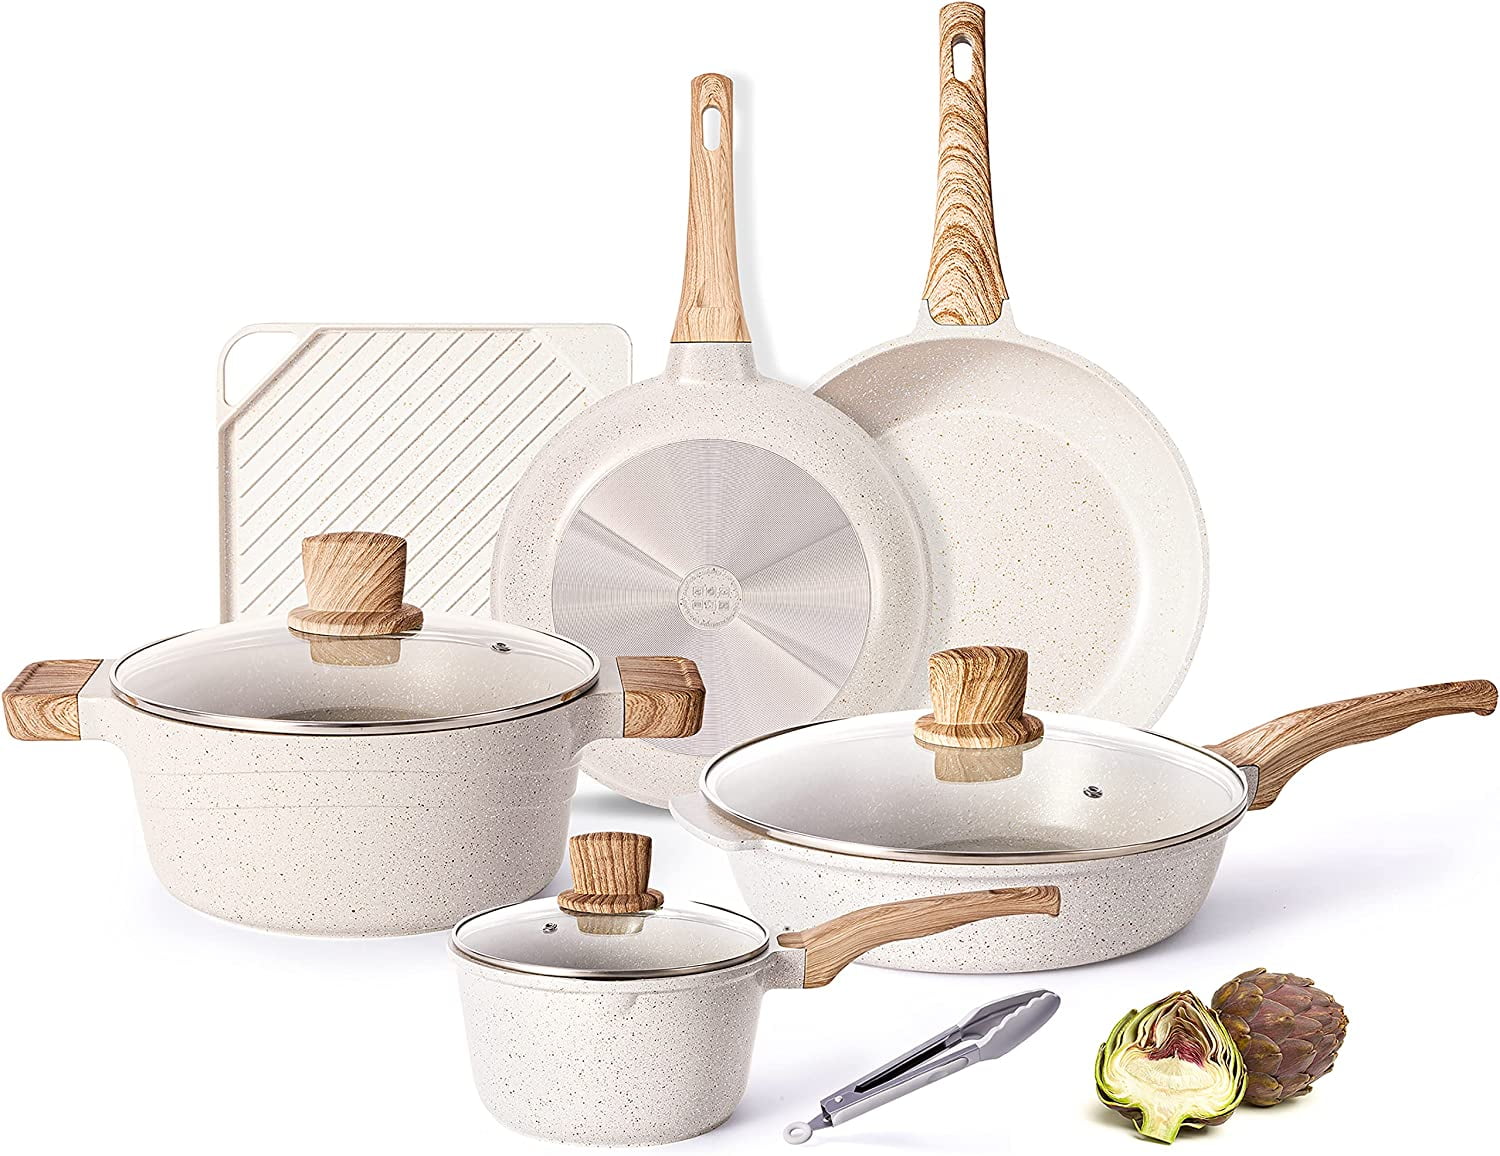 Nonstick Cookware Sets, Pots And Pans Set With Wood Handles